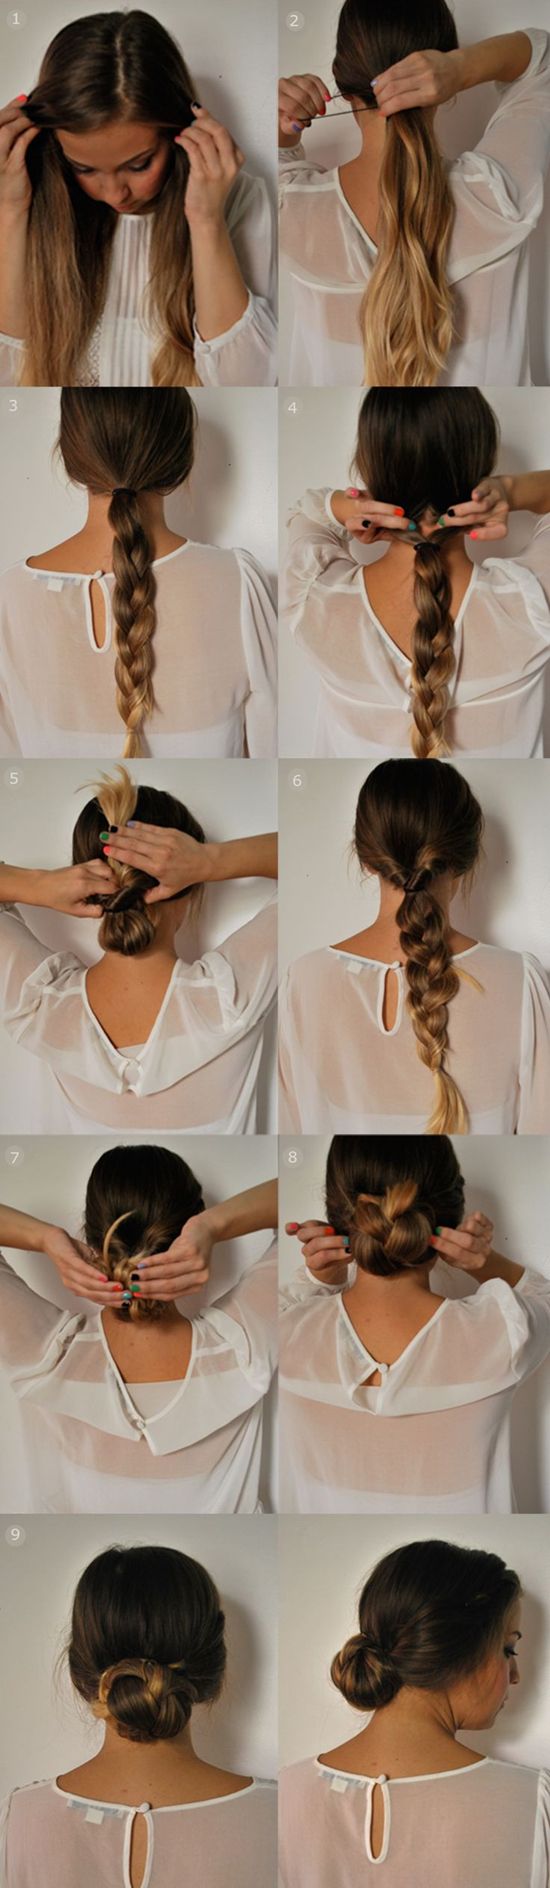 Quick 5 minute updo braided ponytail updo